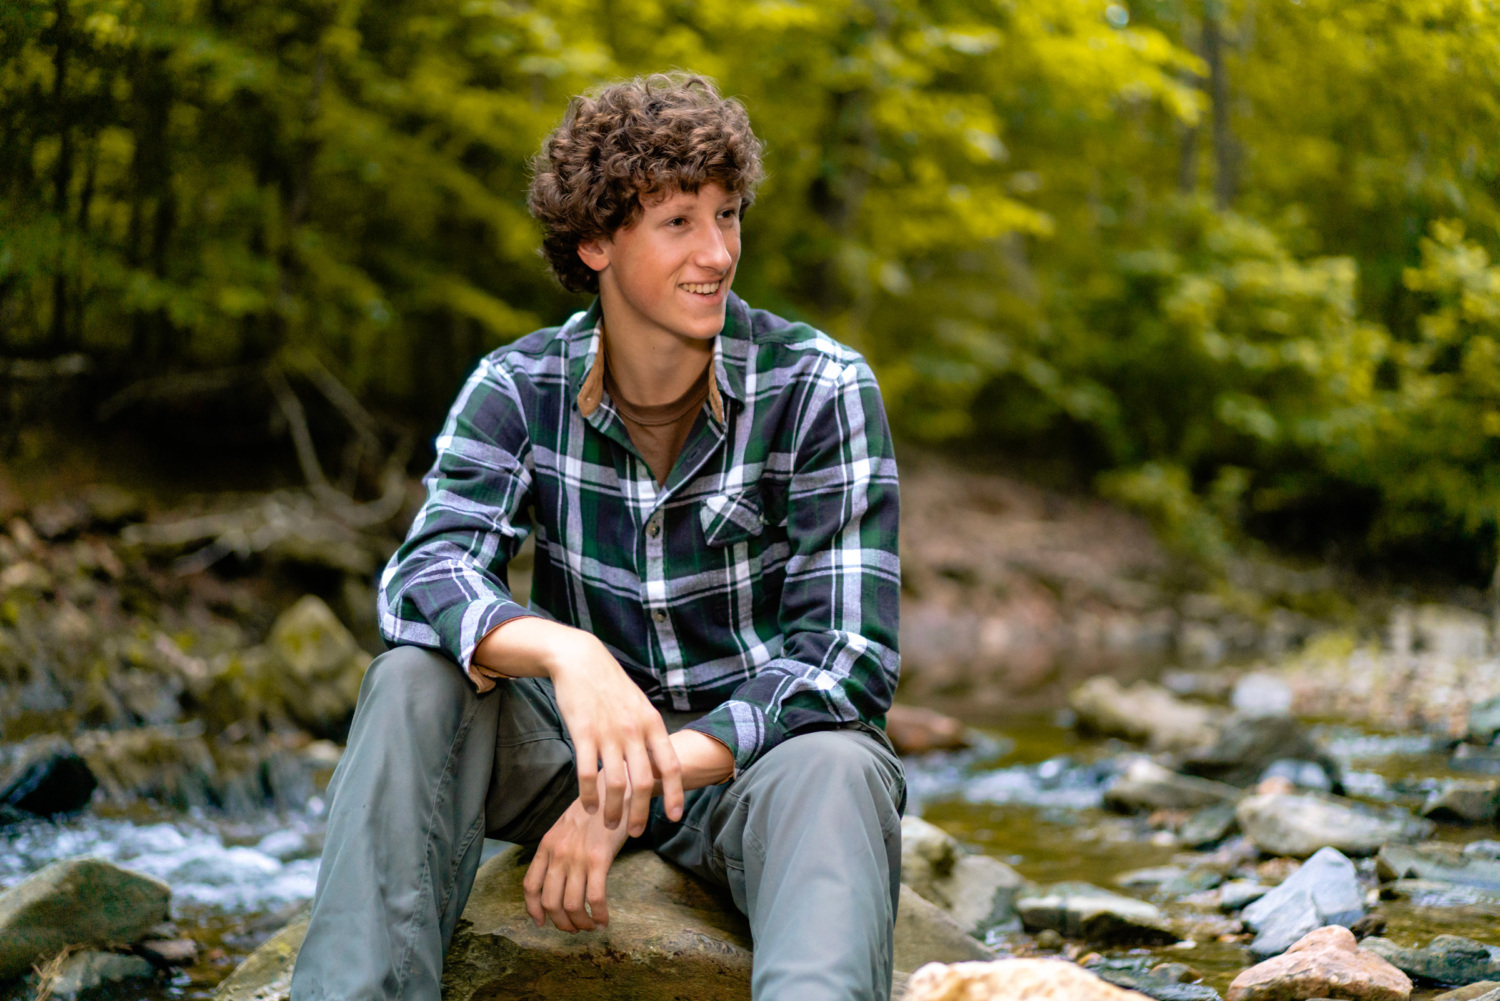 Max Blacksten sitting on a large rock along a river